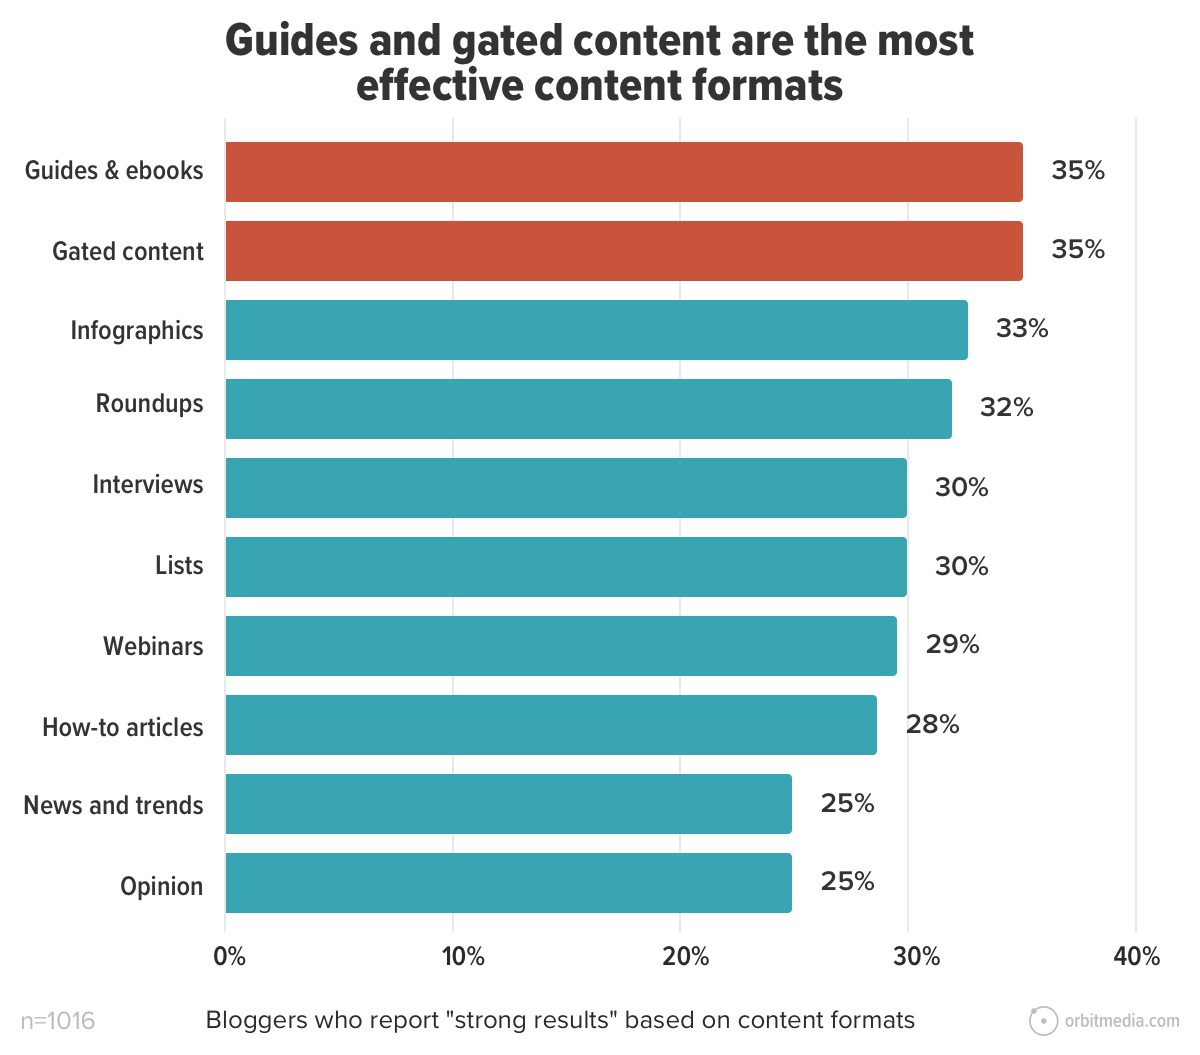 Gated content and guides provide "strong results" for bloggers